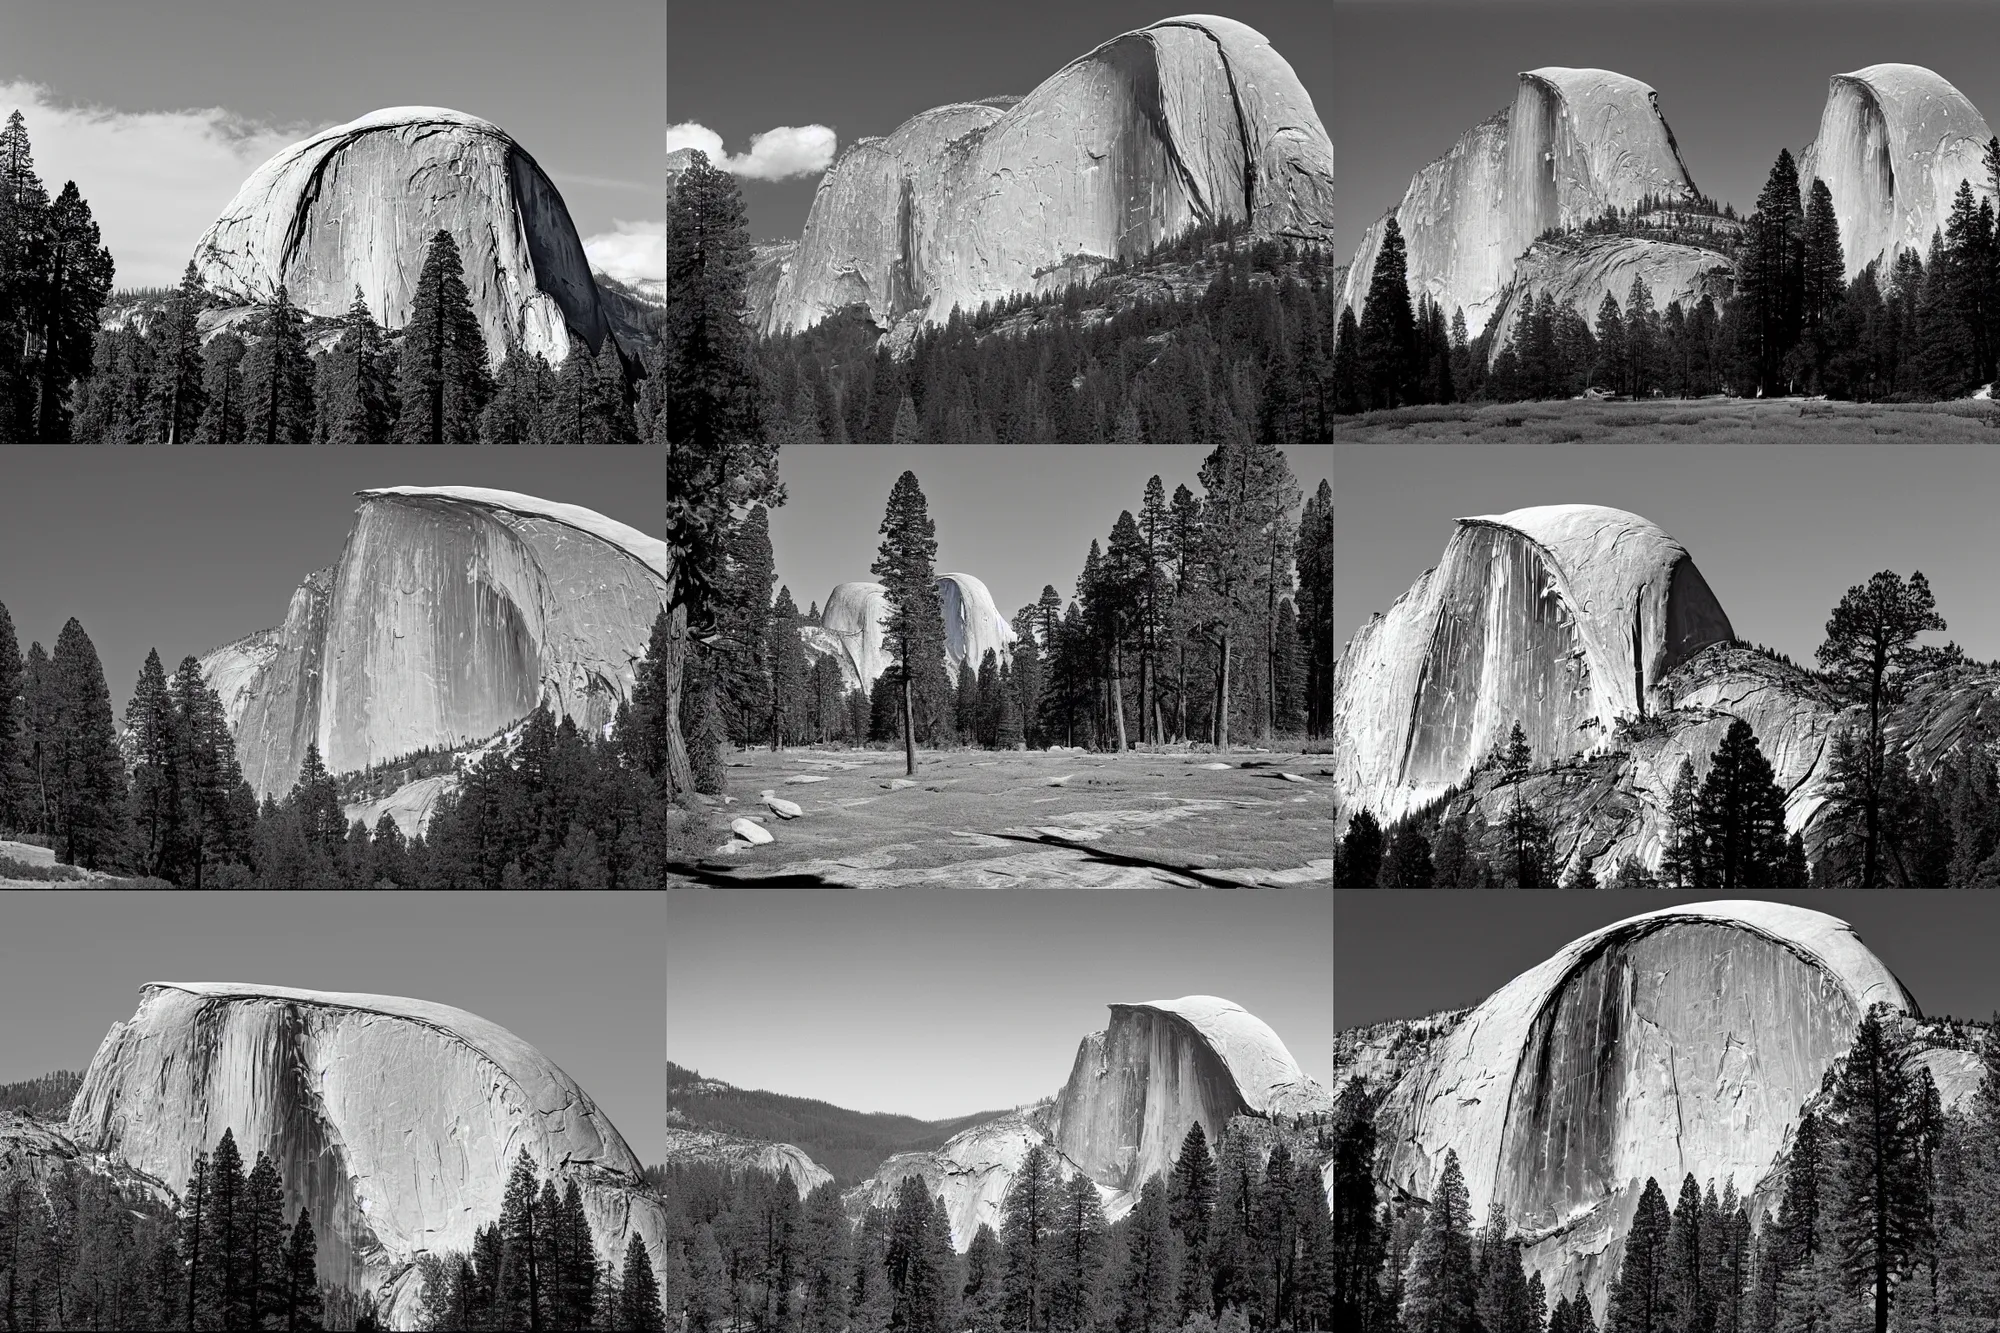 Prompt: photo of half dome by ansel adams